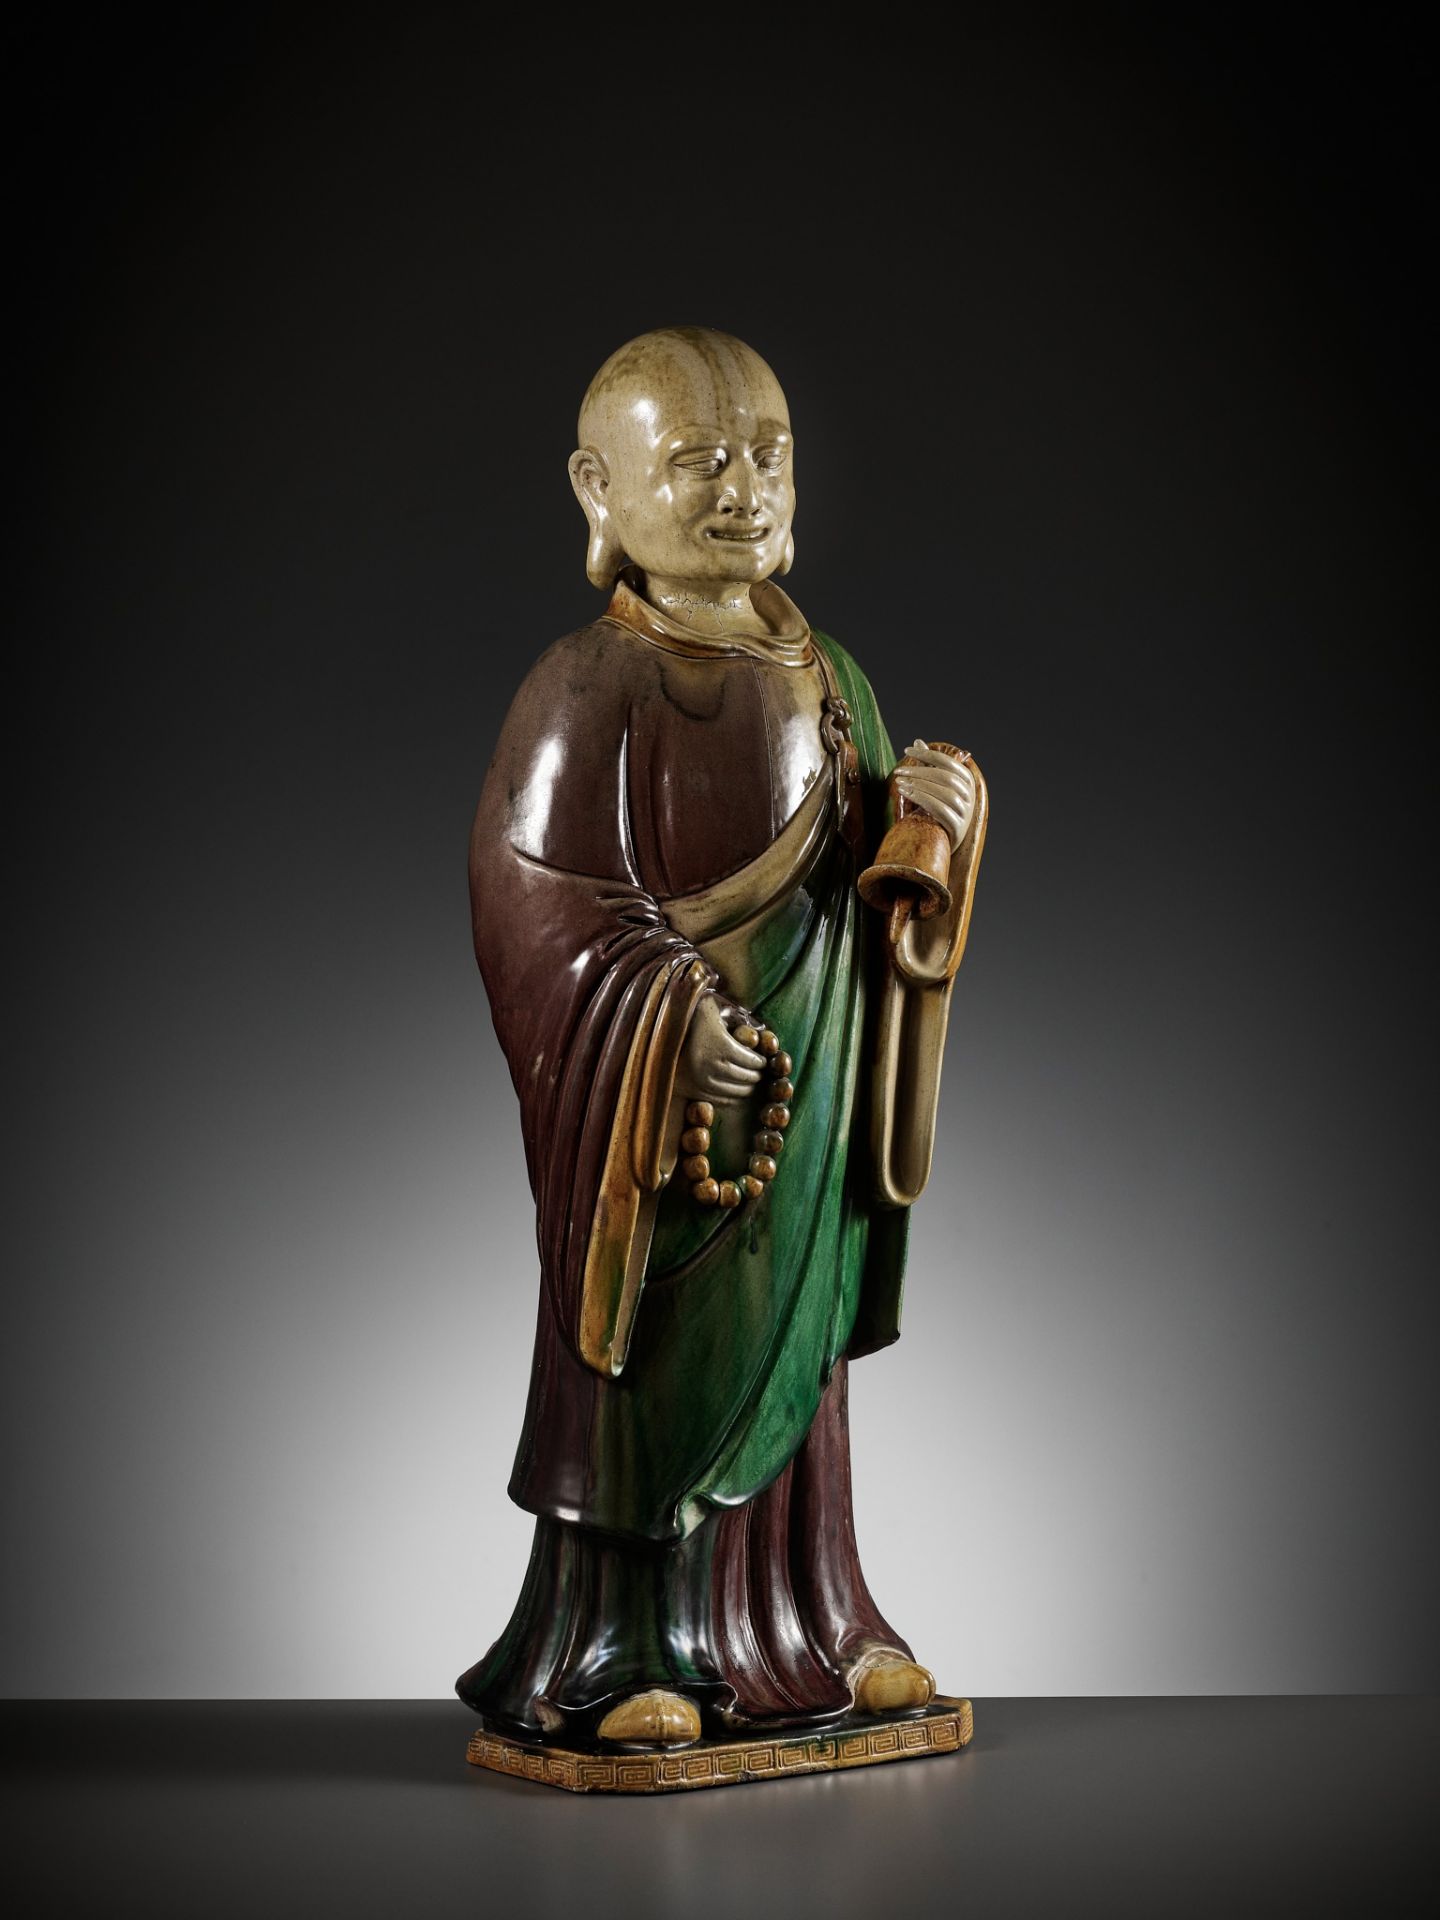 A MASSIVE SANCAI-GLAZED FIGURE OF A MONK, LATE MING DYNASTY TO KANGXI PERIOD - Image 15 of 16